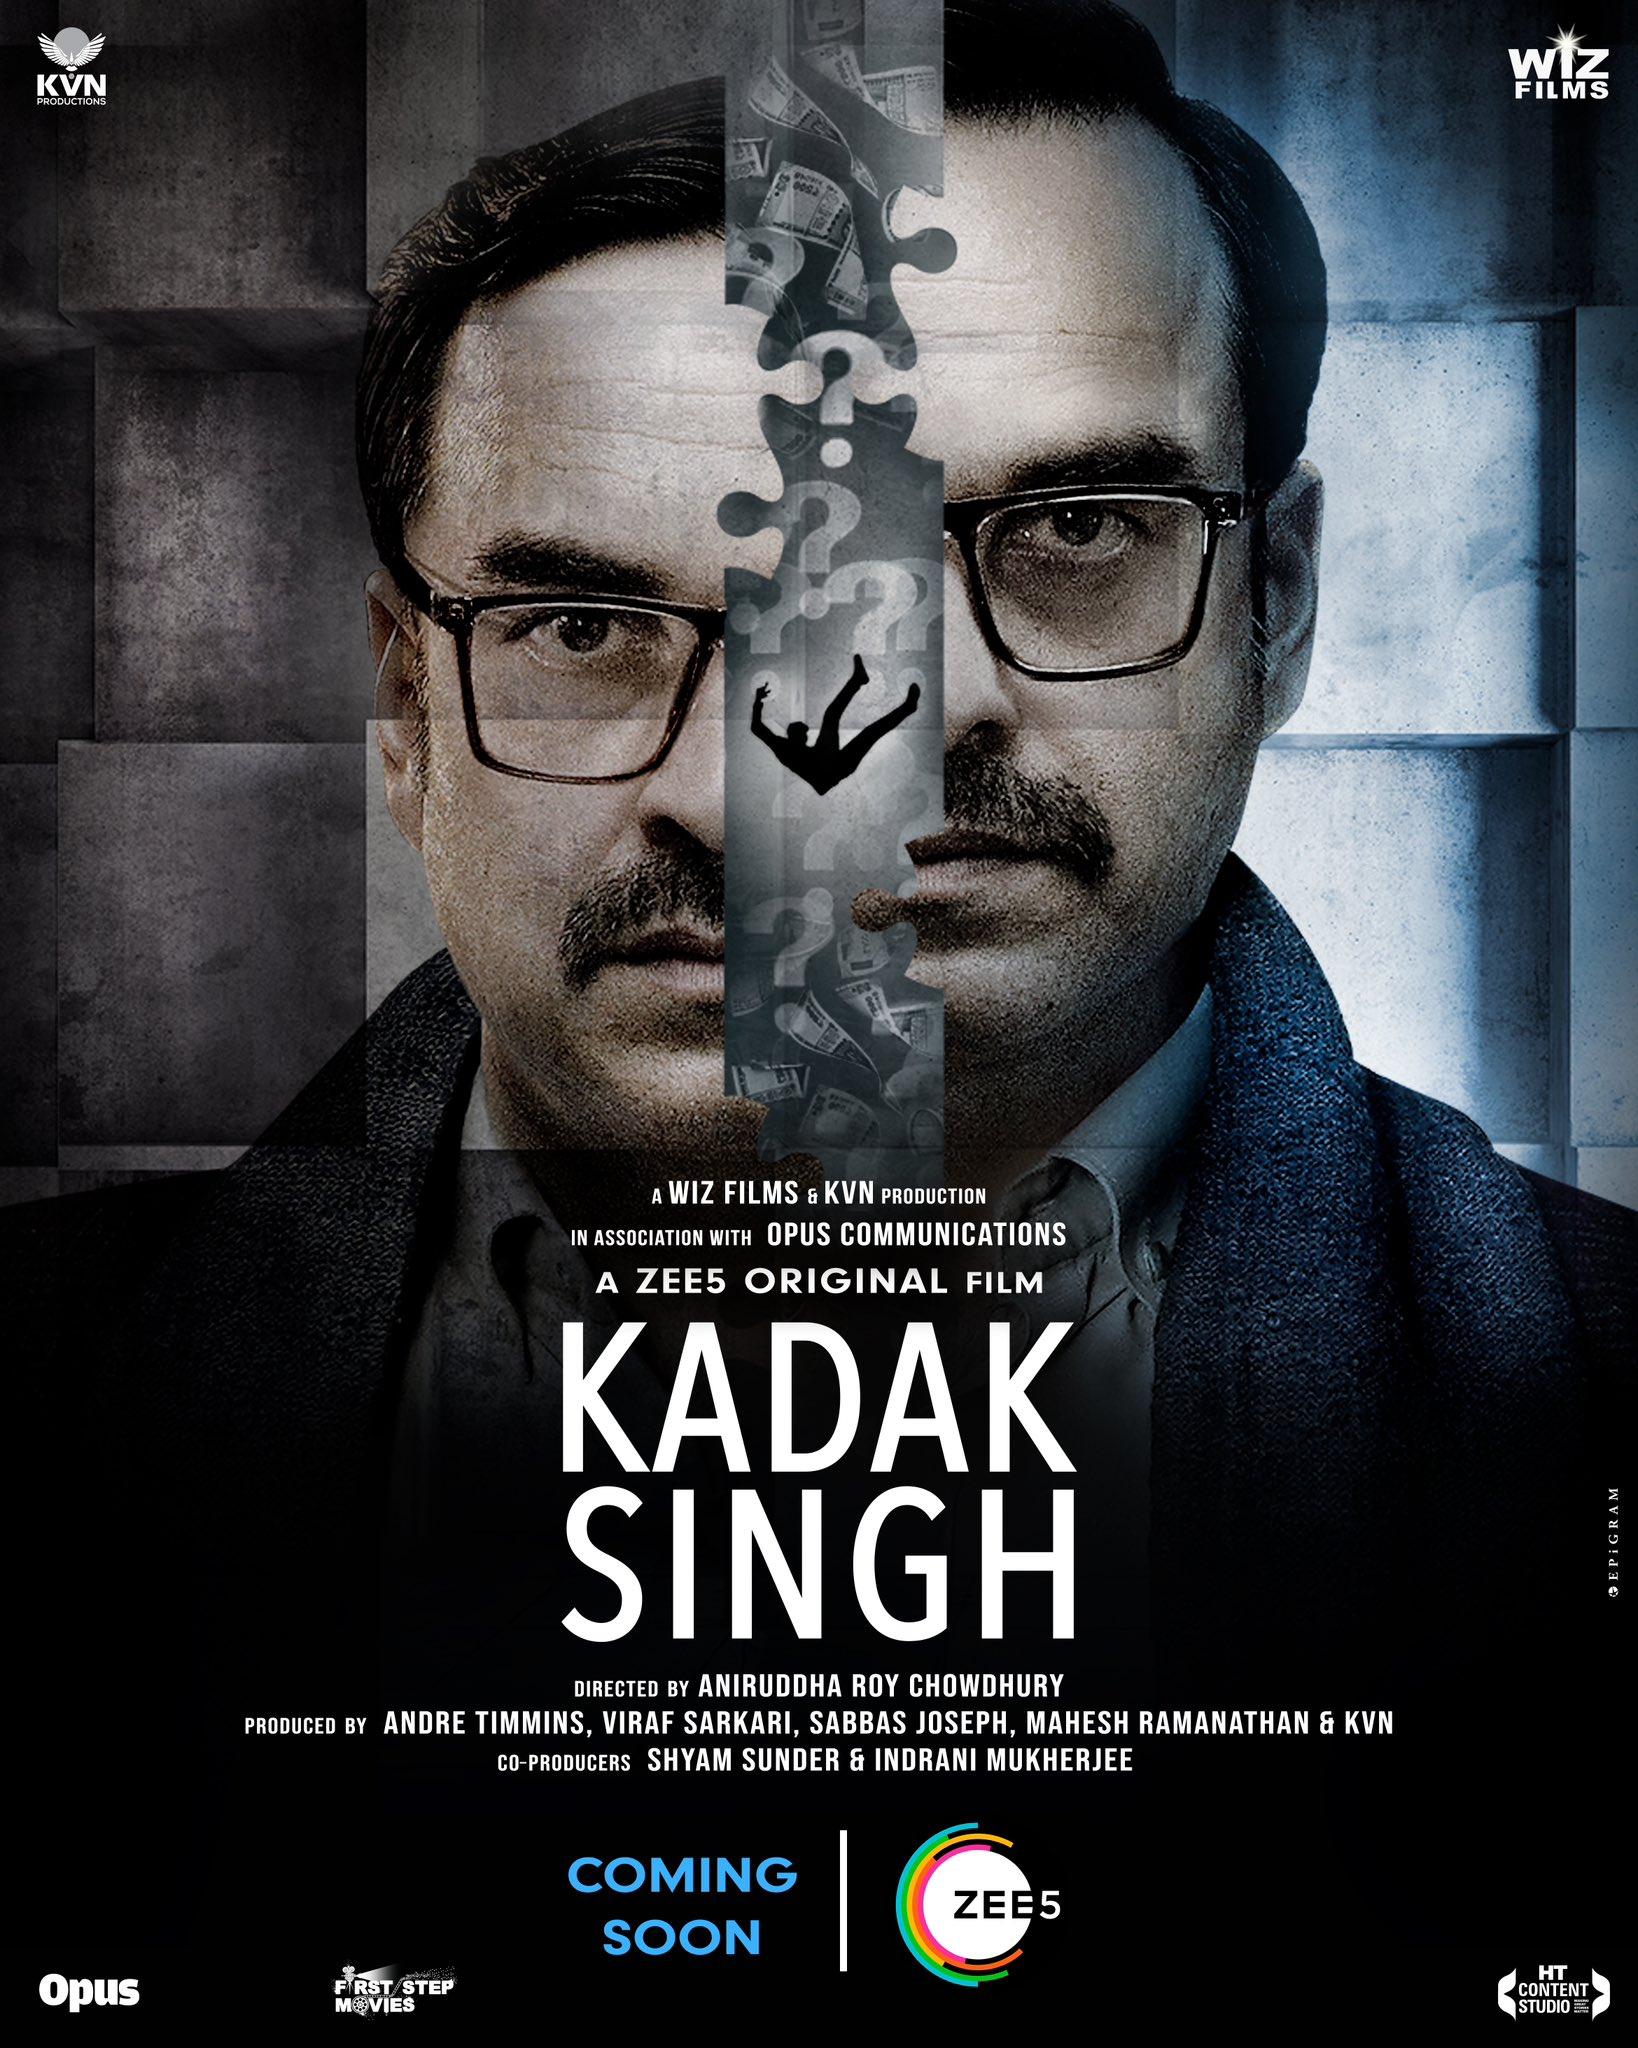 Kadak Singh (December 8) - Streaming on ZEE5Kadak Singh delves into memory and identity complexities, featuring Pankaj Tripathi as AK Srivastava, an officer navigating a financial crime amidst retrograde amnesia. The film challenges Srivastava to rediscover himself through various perspectives.